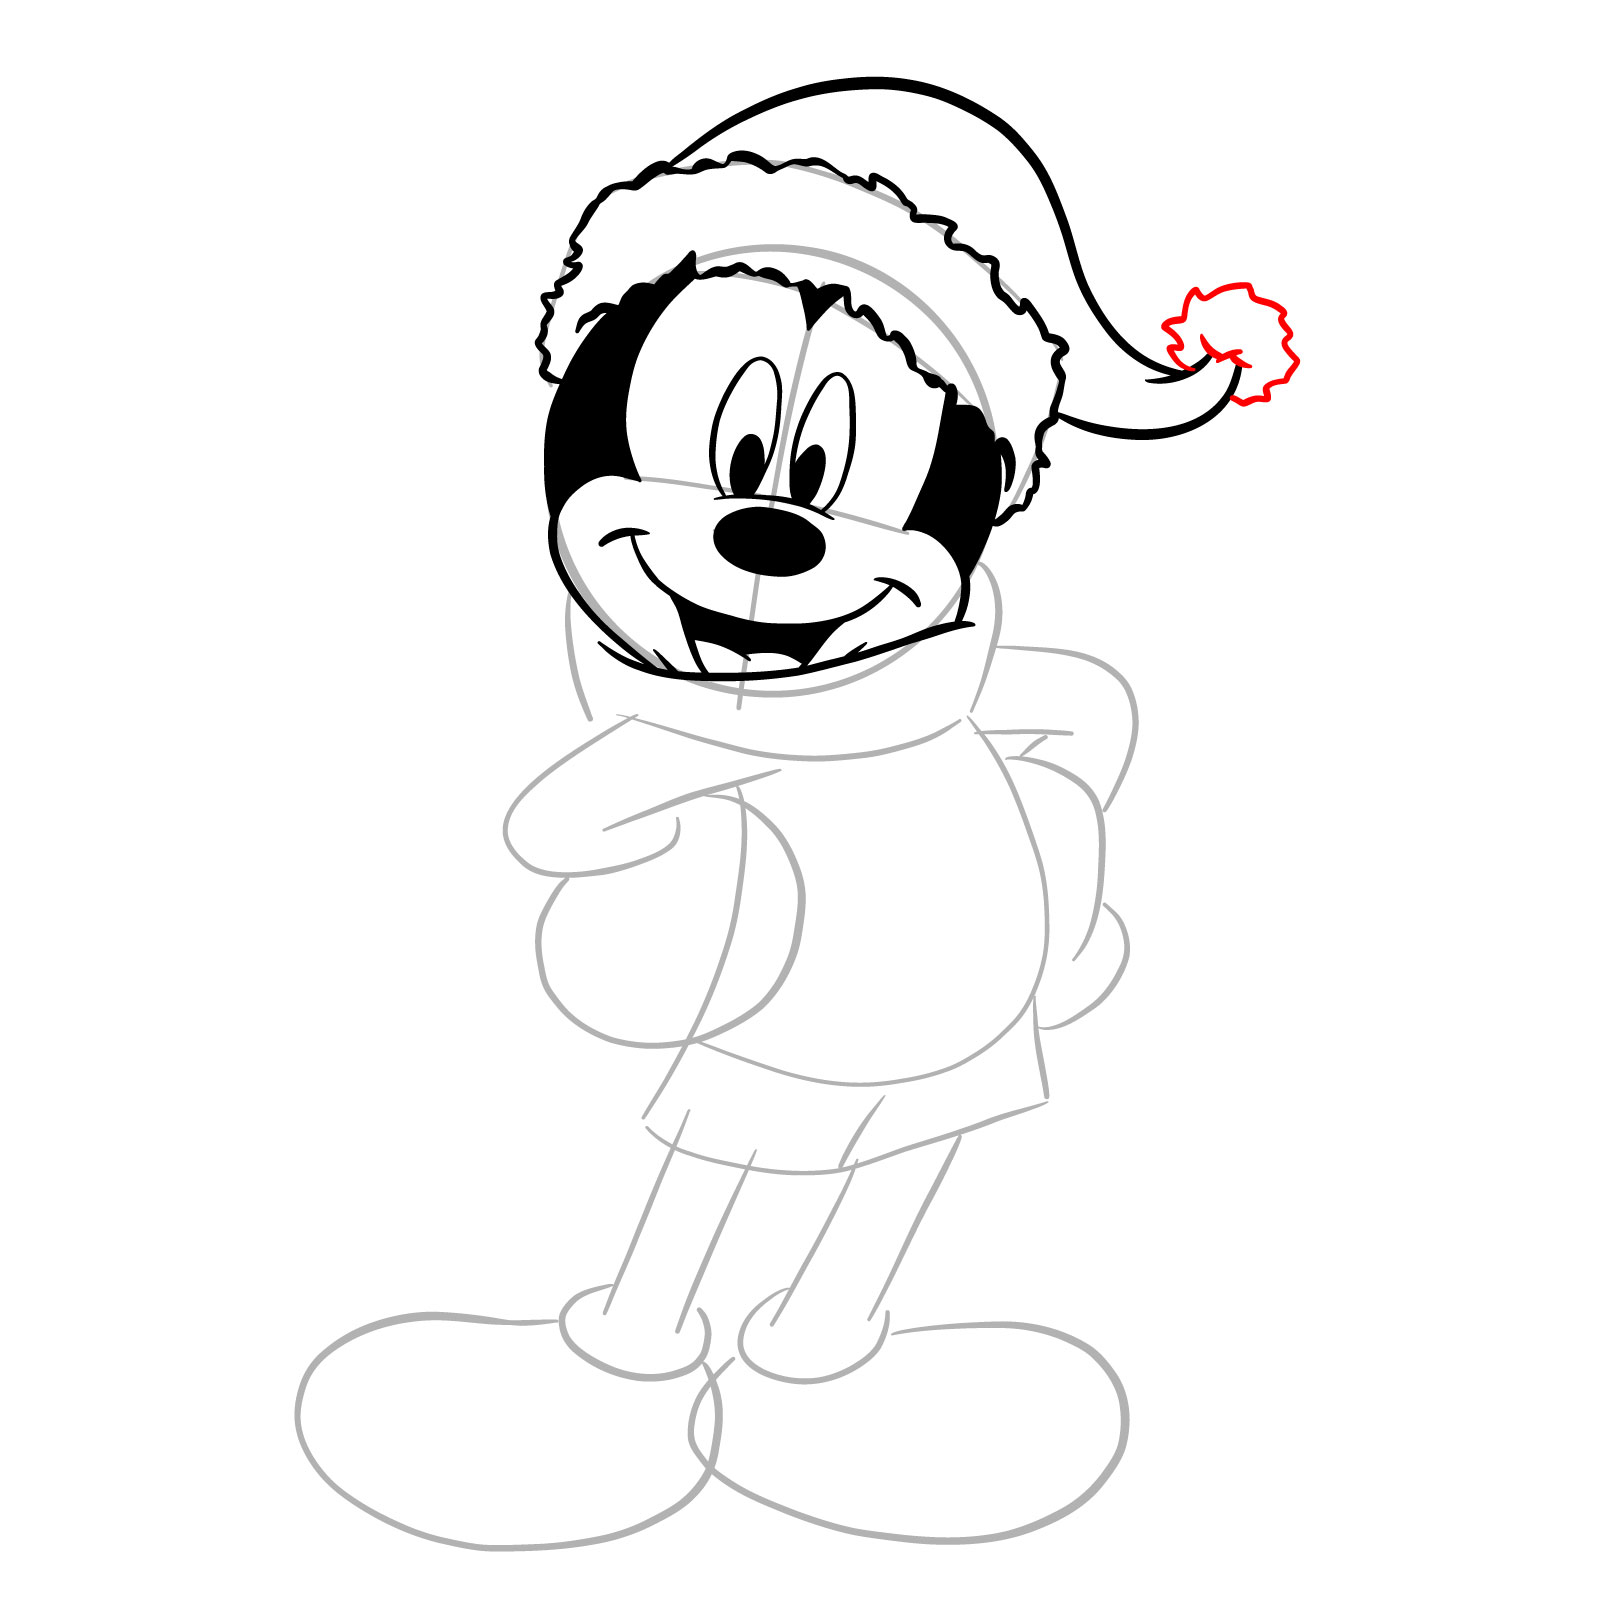 How to draw Santa Mickey Mouse - step 16